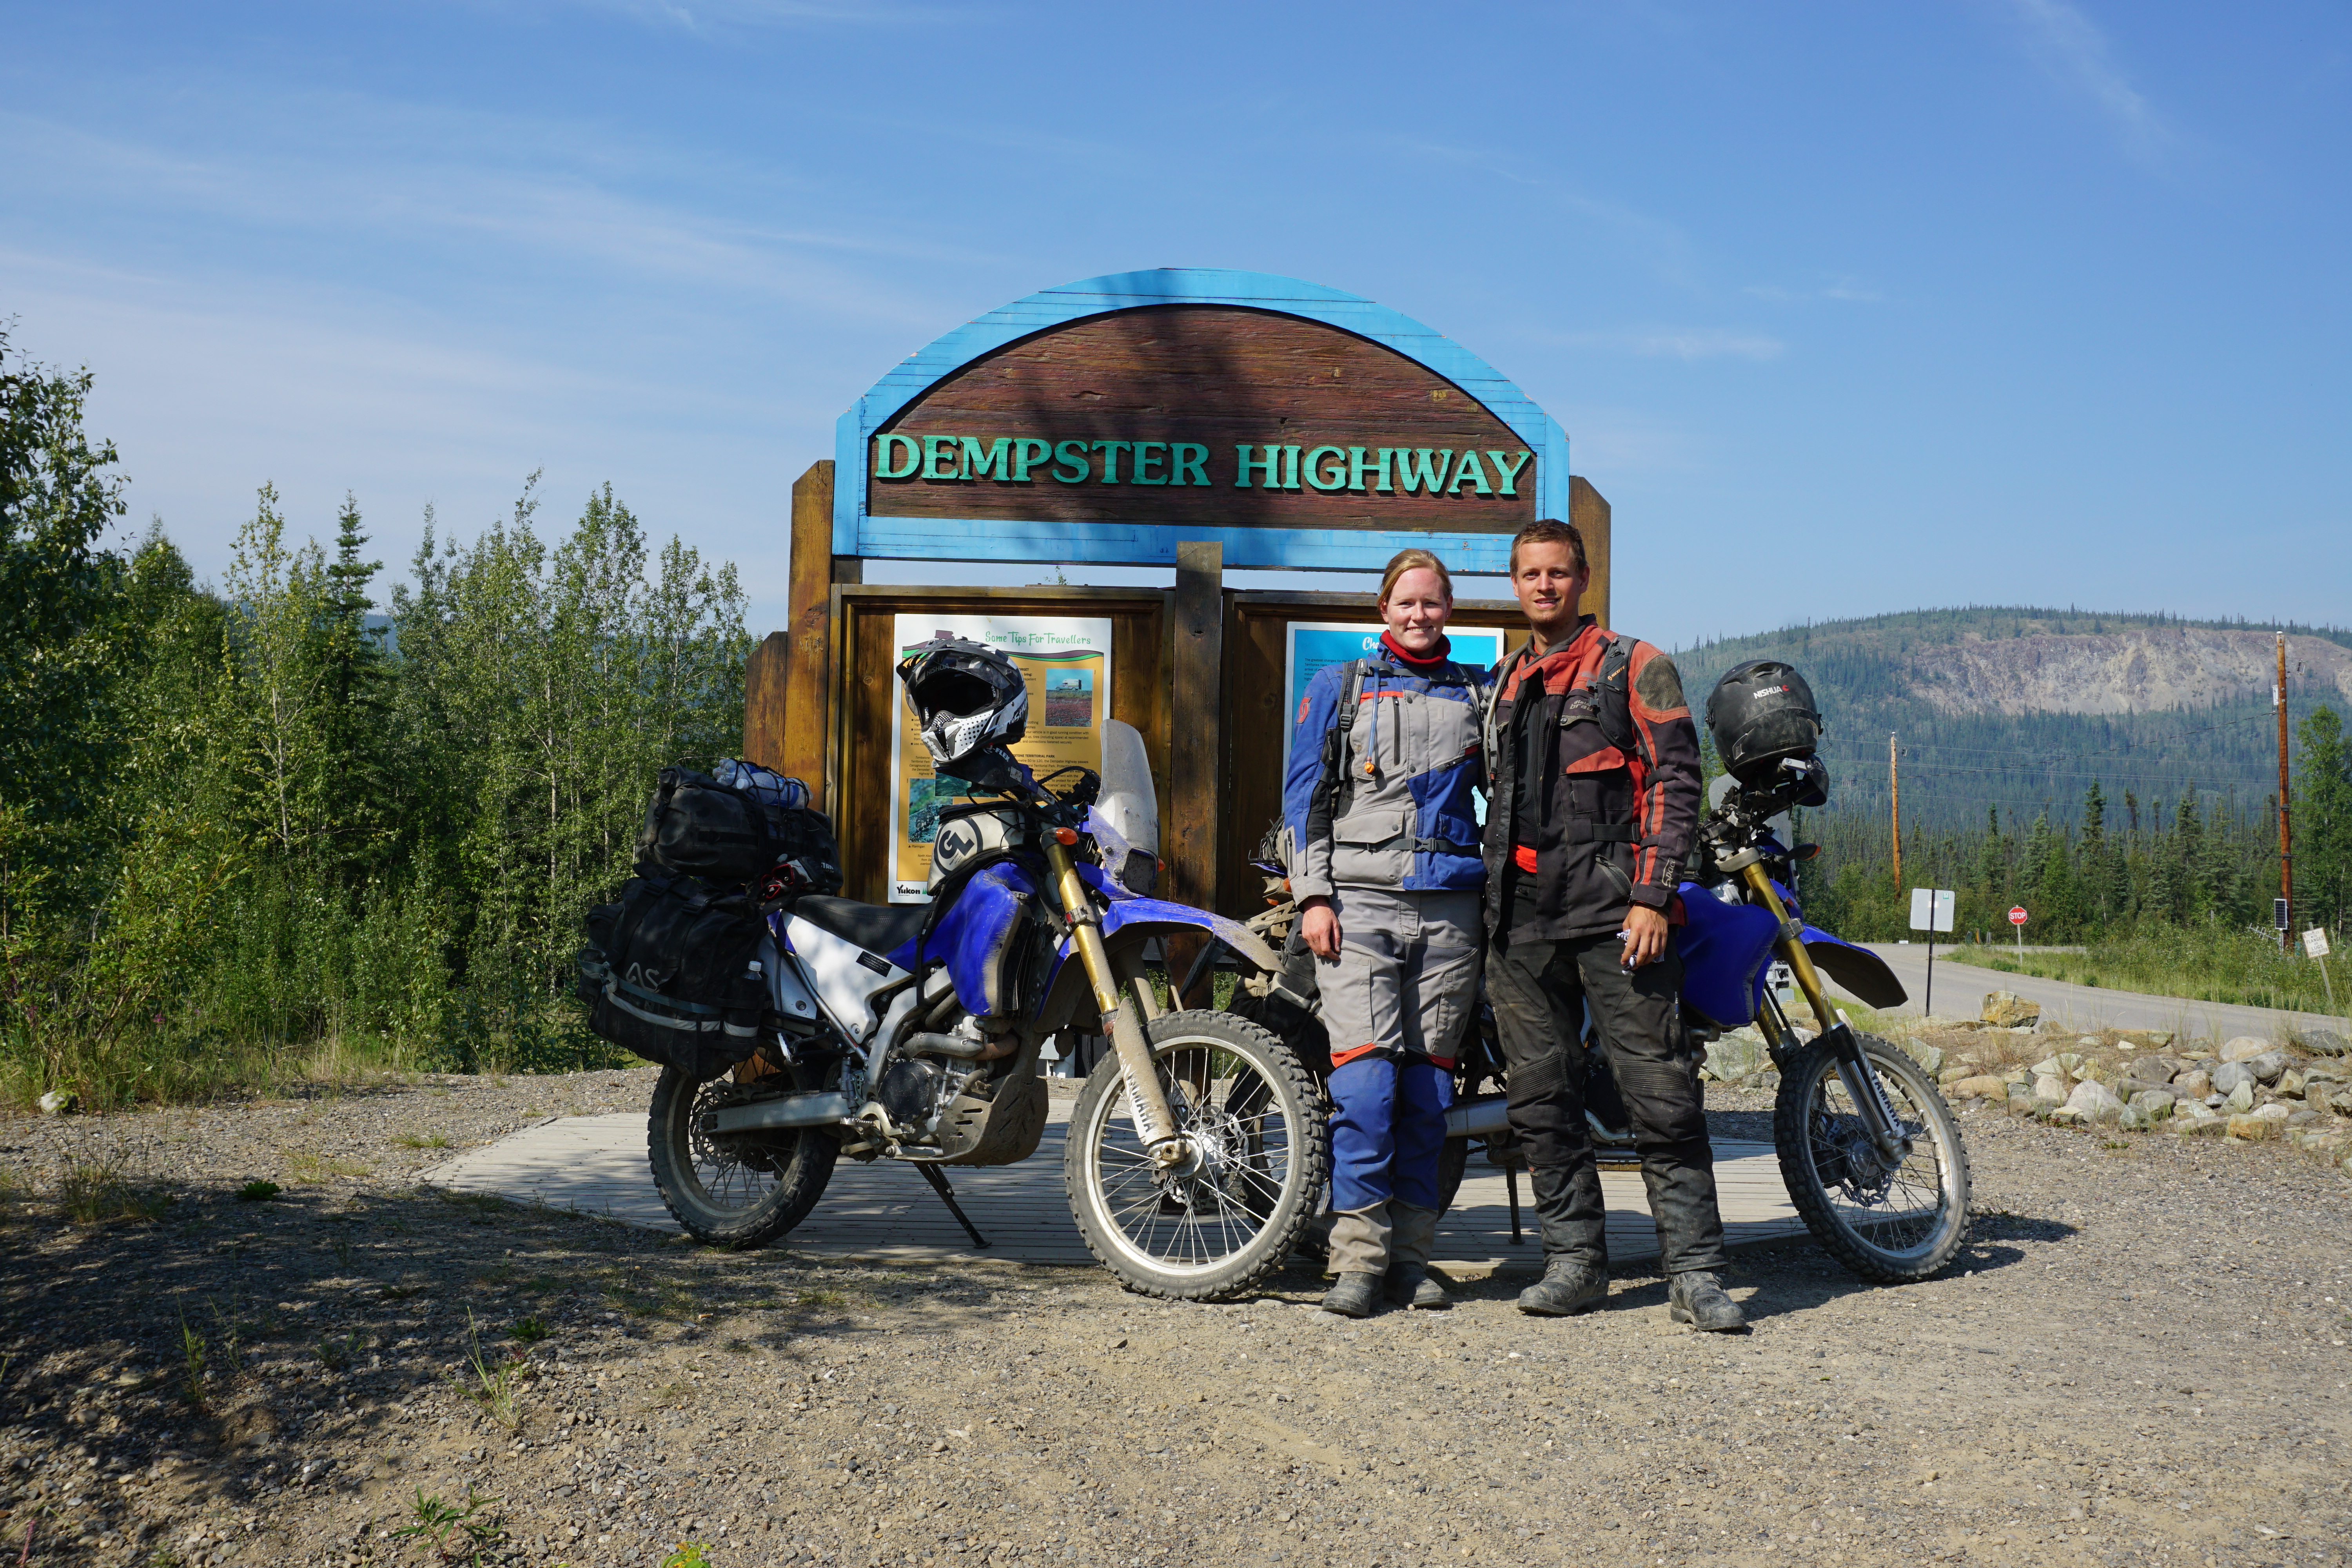 We survived the Dempster Highway!